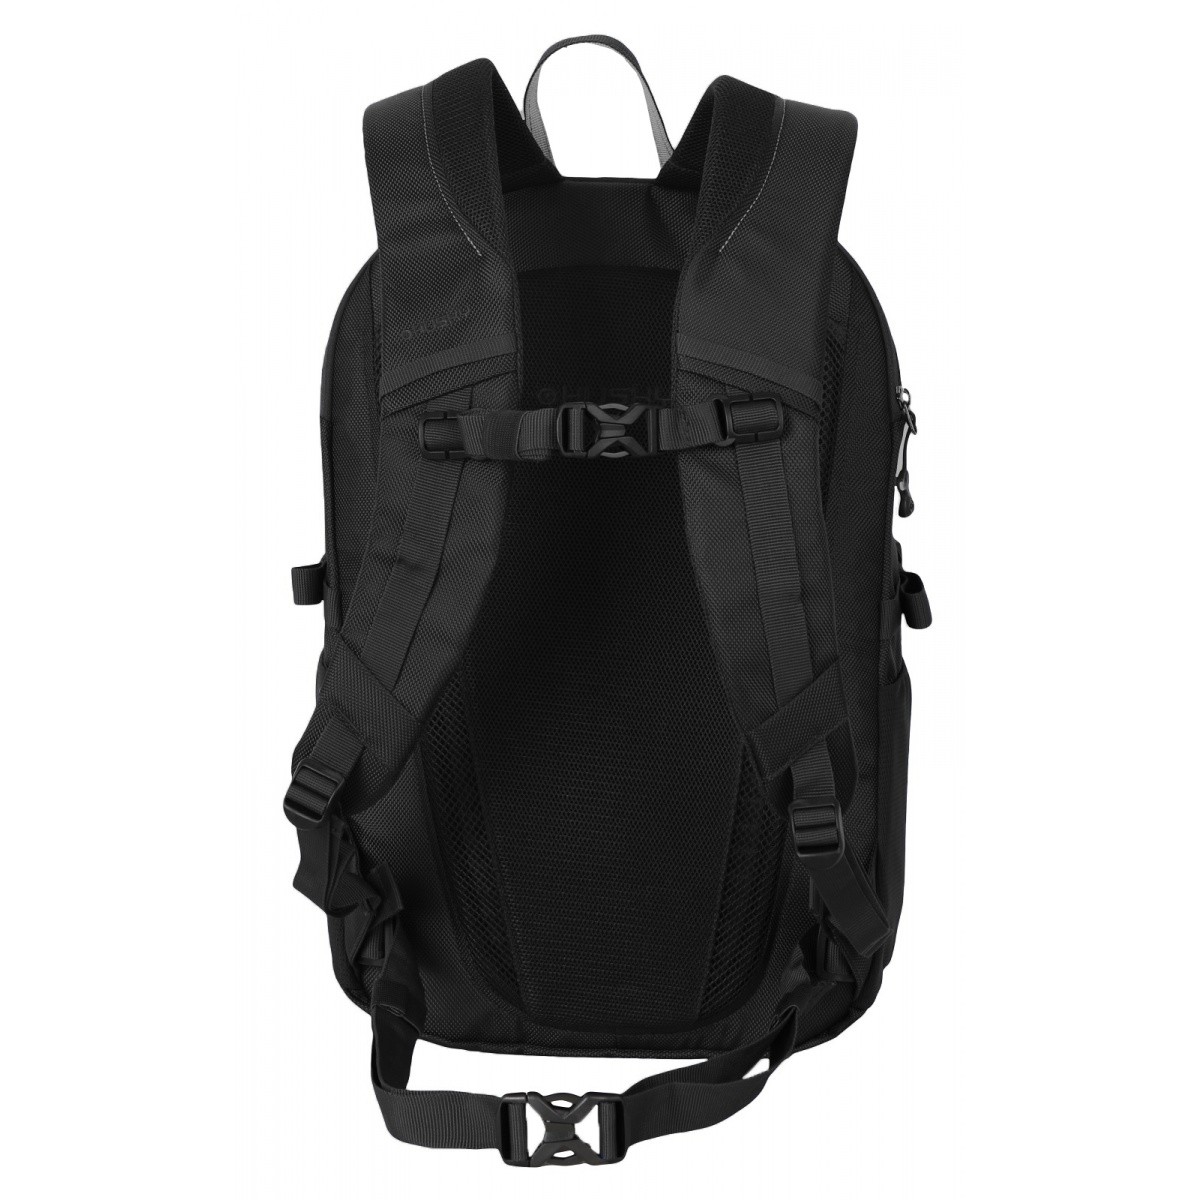 Backpack Nory 22 BLK HUSKY - view 4